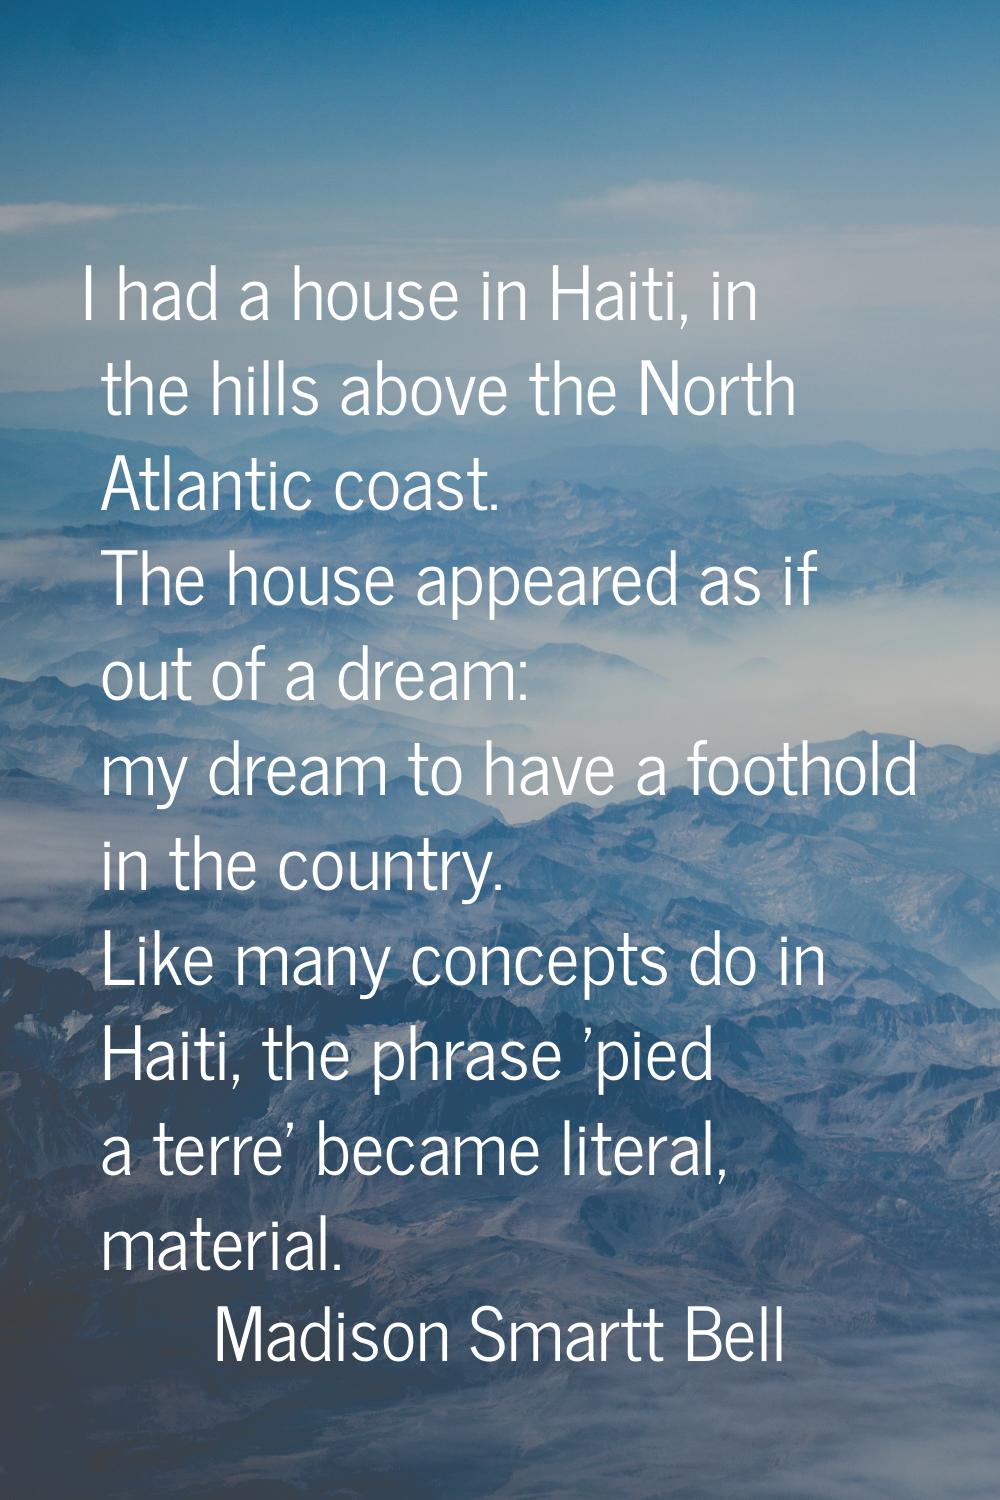 I had a house in Haiti, in the hills above the North Atlantic coast. The house appeared as if out o